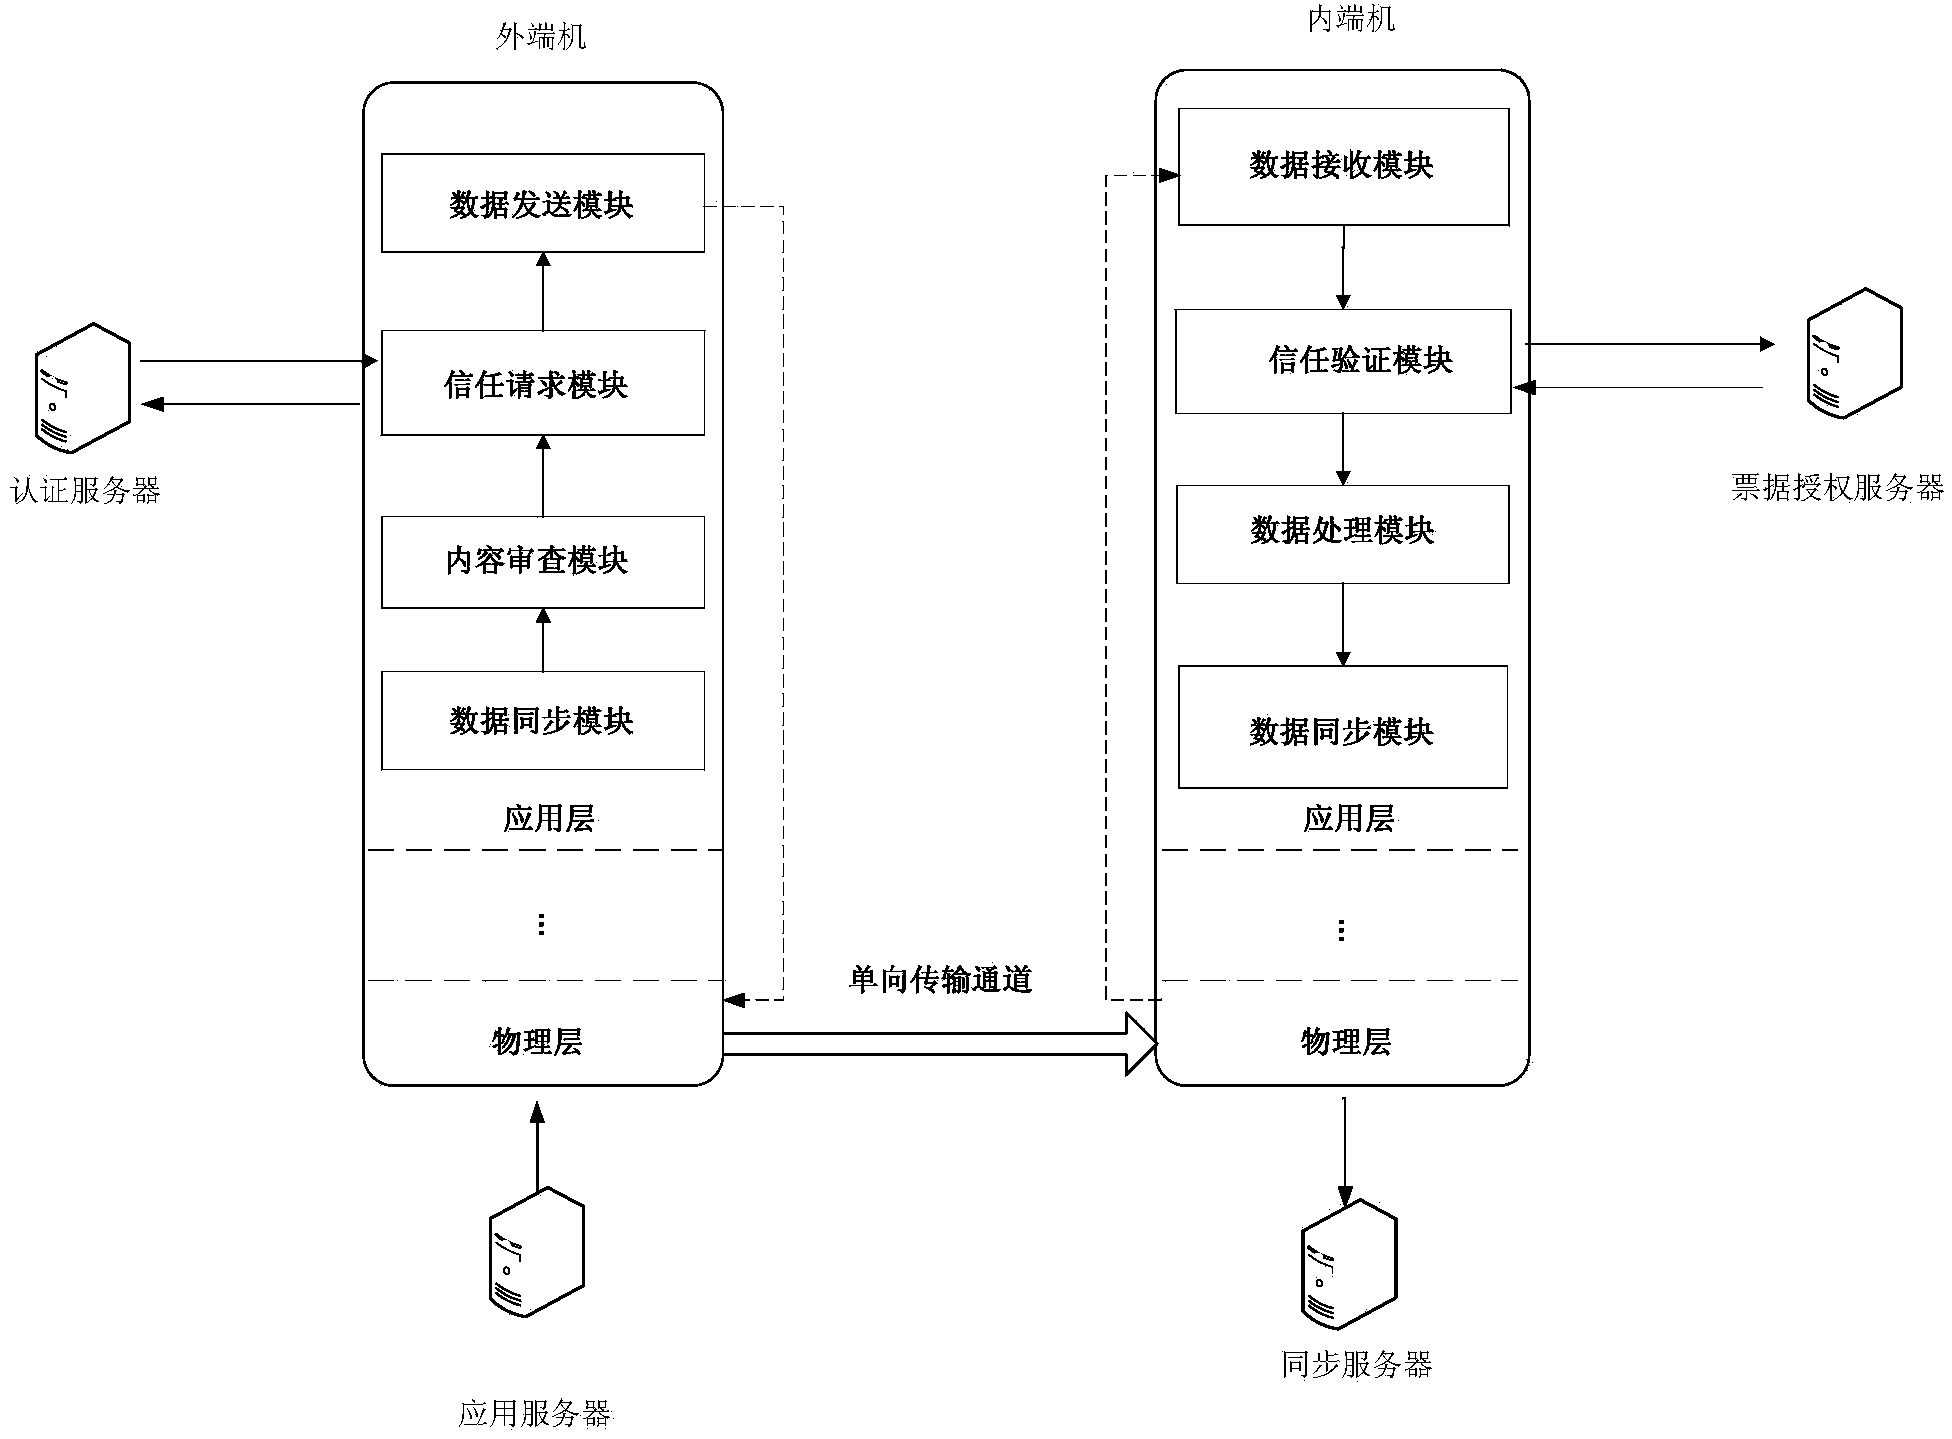 Boundary access control method based on double one-way separation gatekeepers